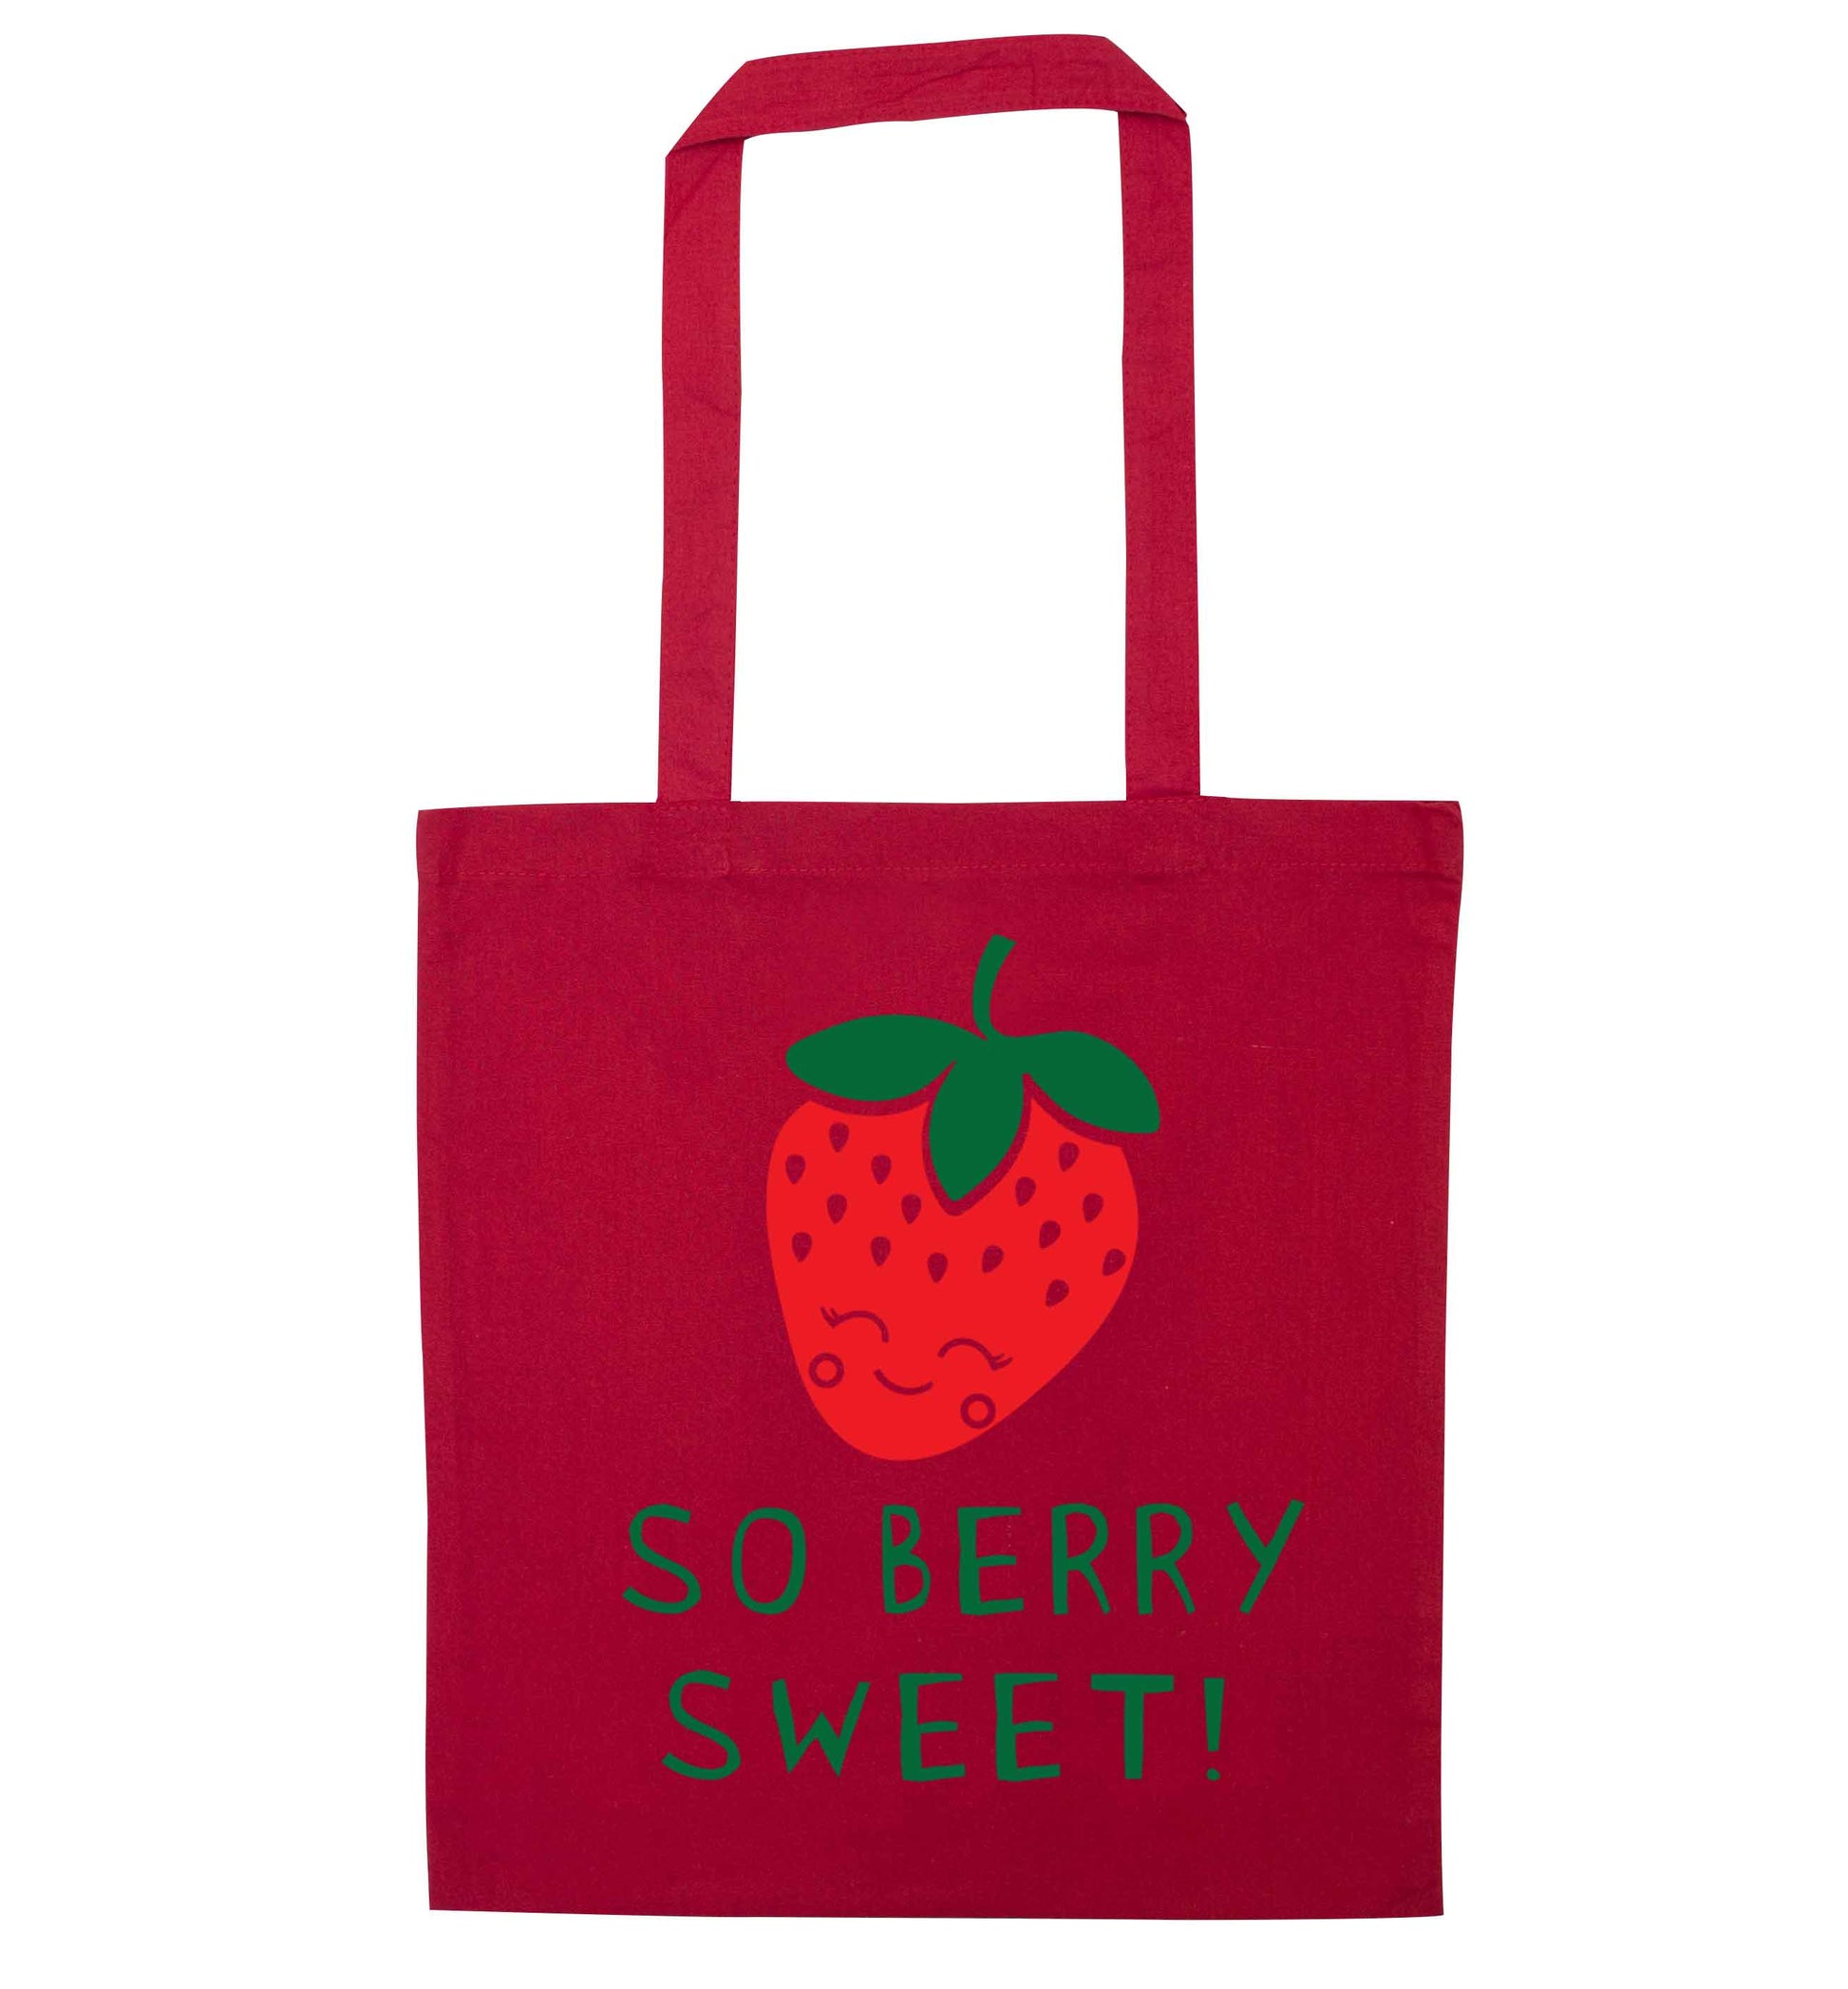 So berry sweet red tote bag